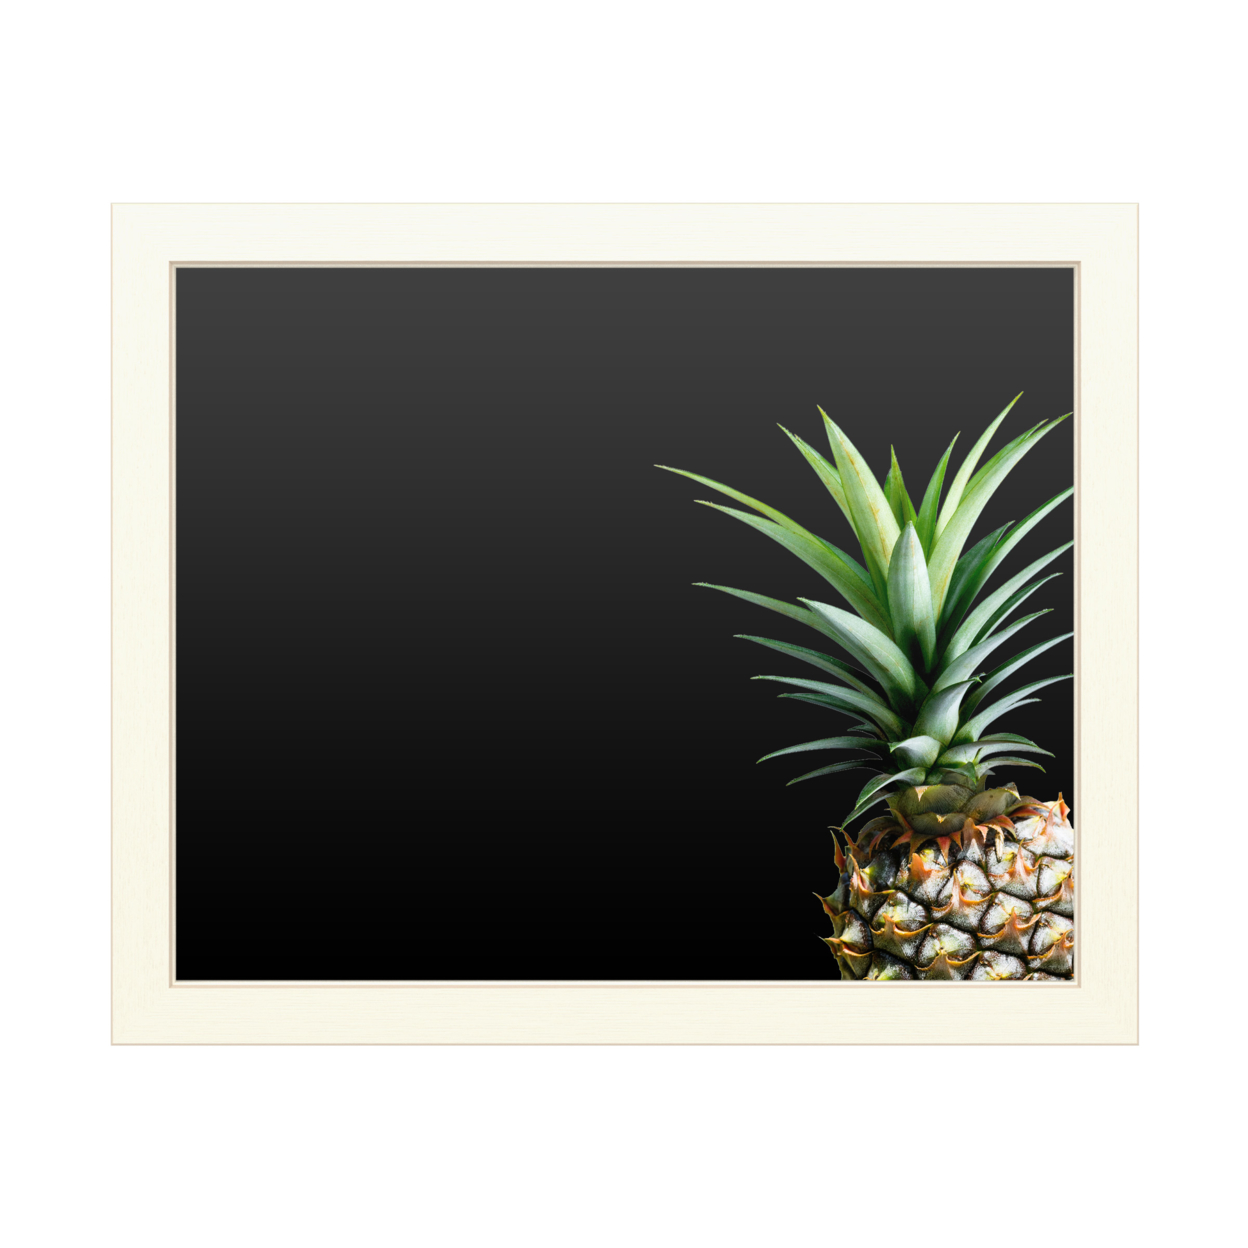 16 X 20 Chalk Board With Printed Artwork - Lexie Gree Pineapple Color White Board - Ready To Hang Chalkboard